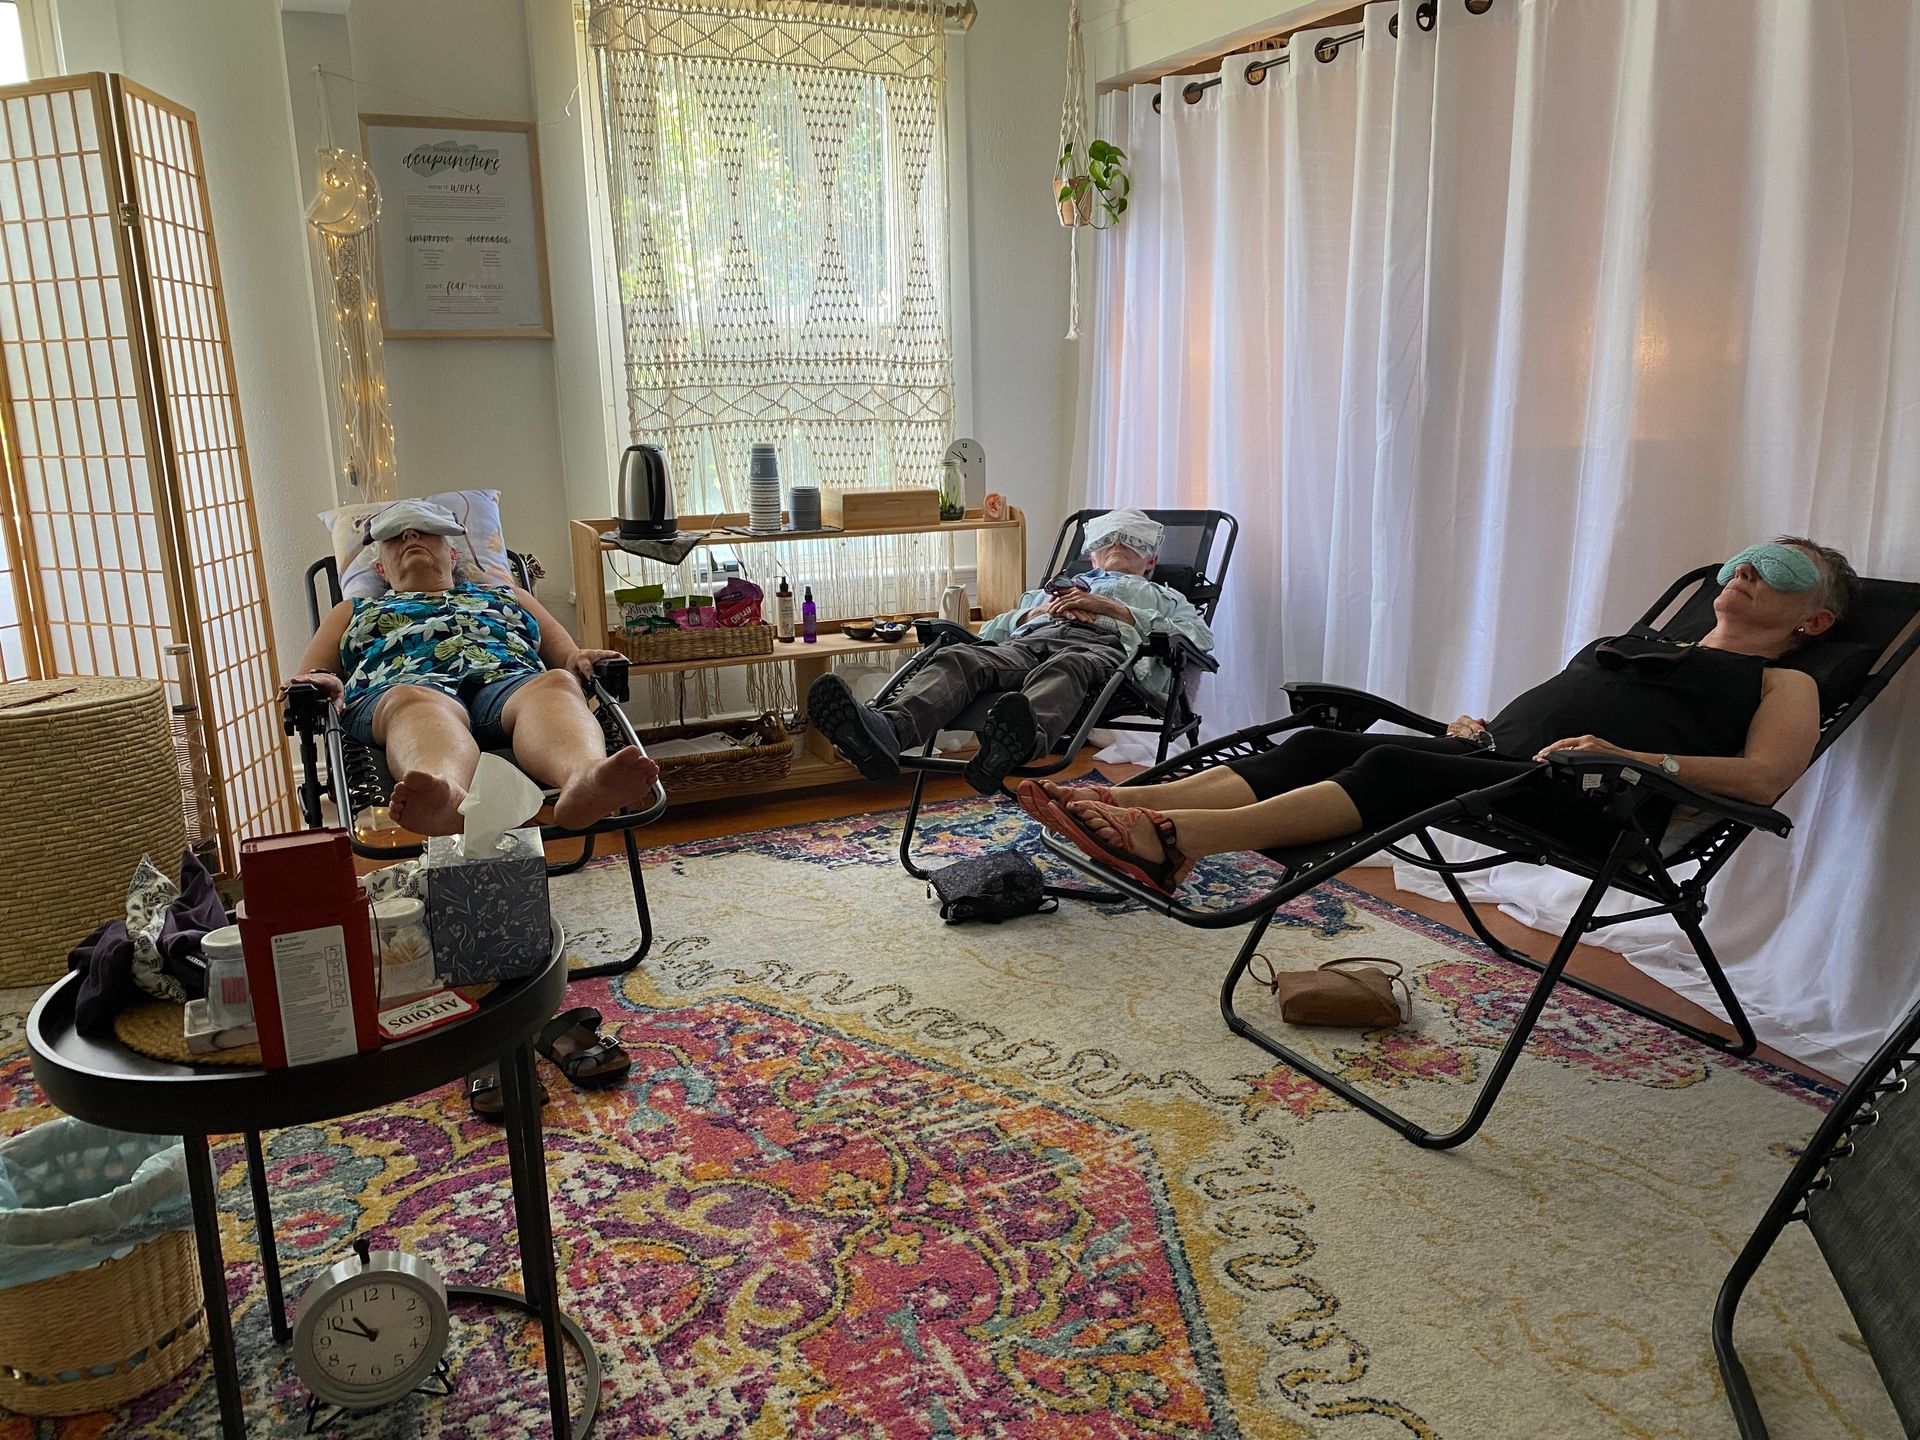 A group of people are sitting in chairs in a living room.